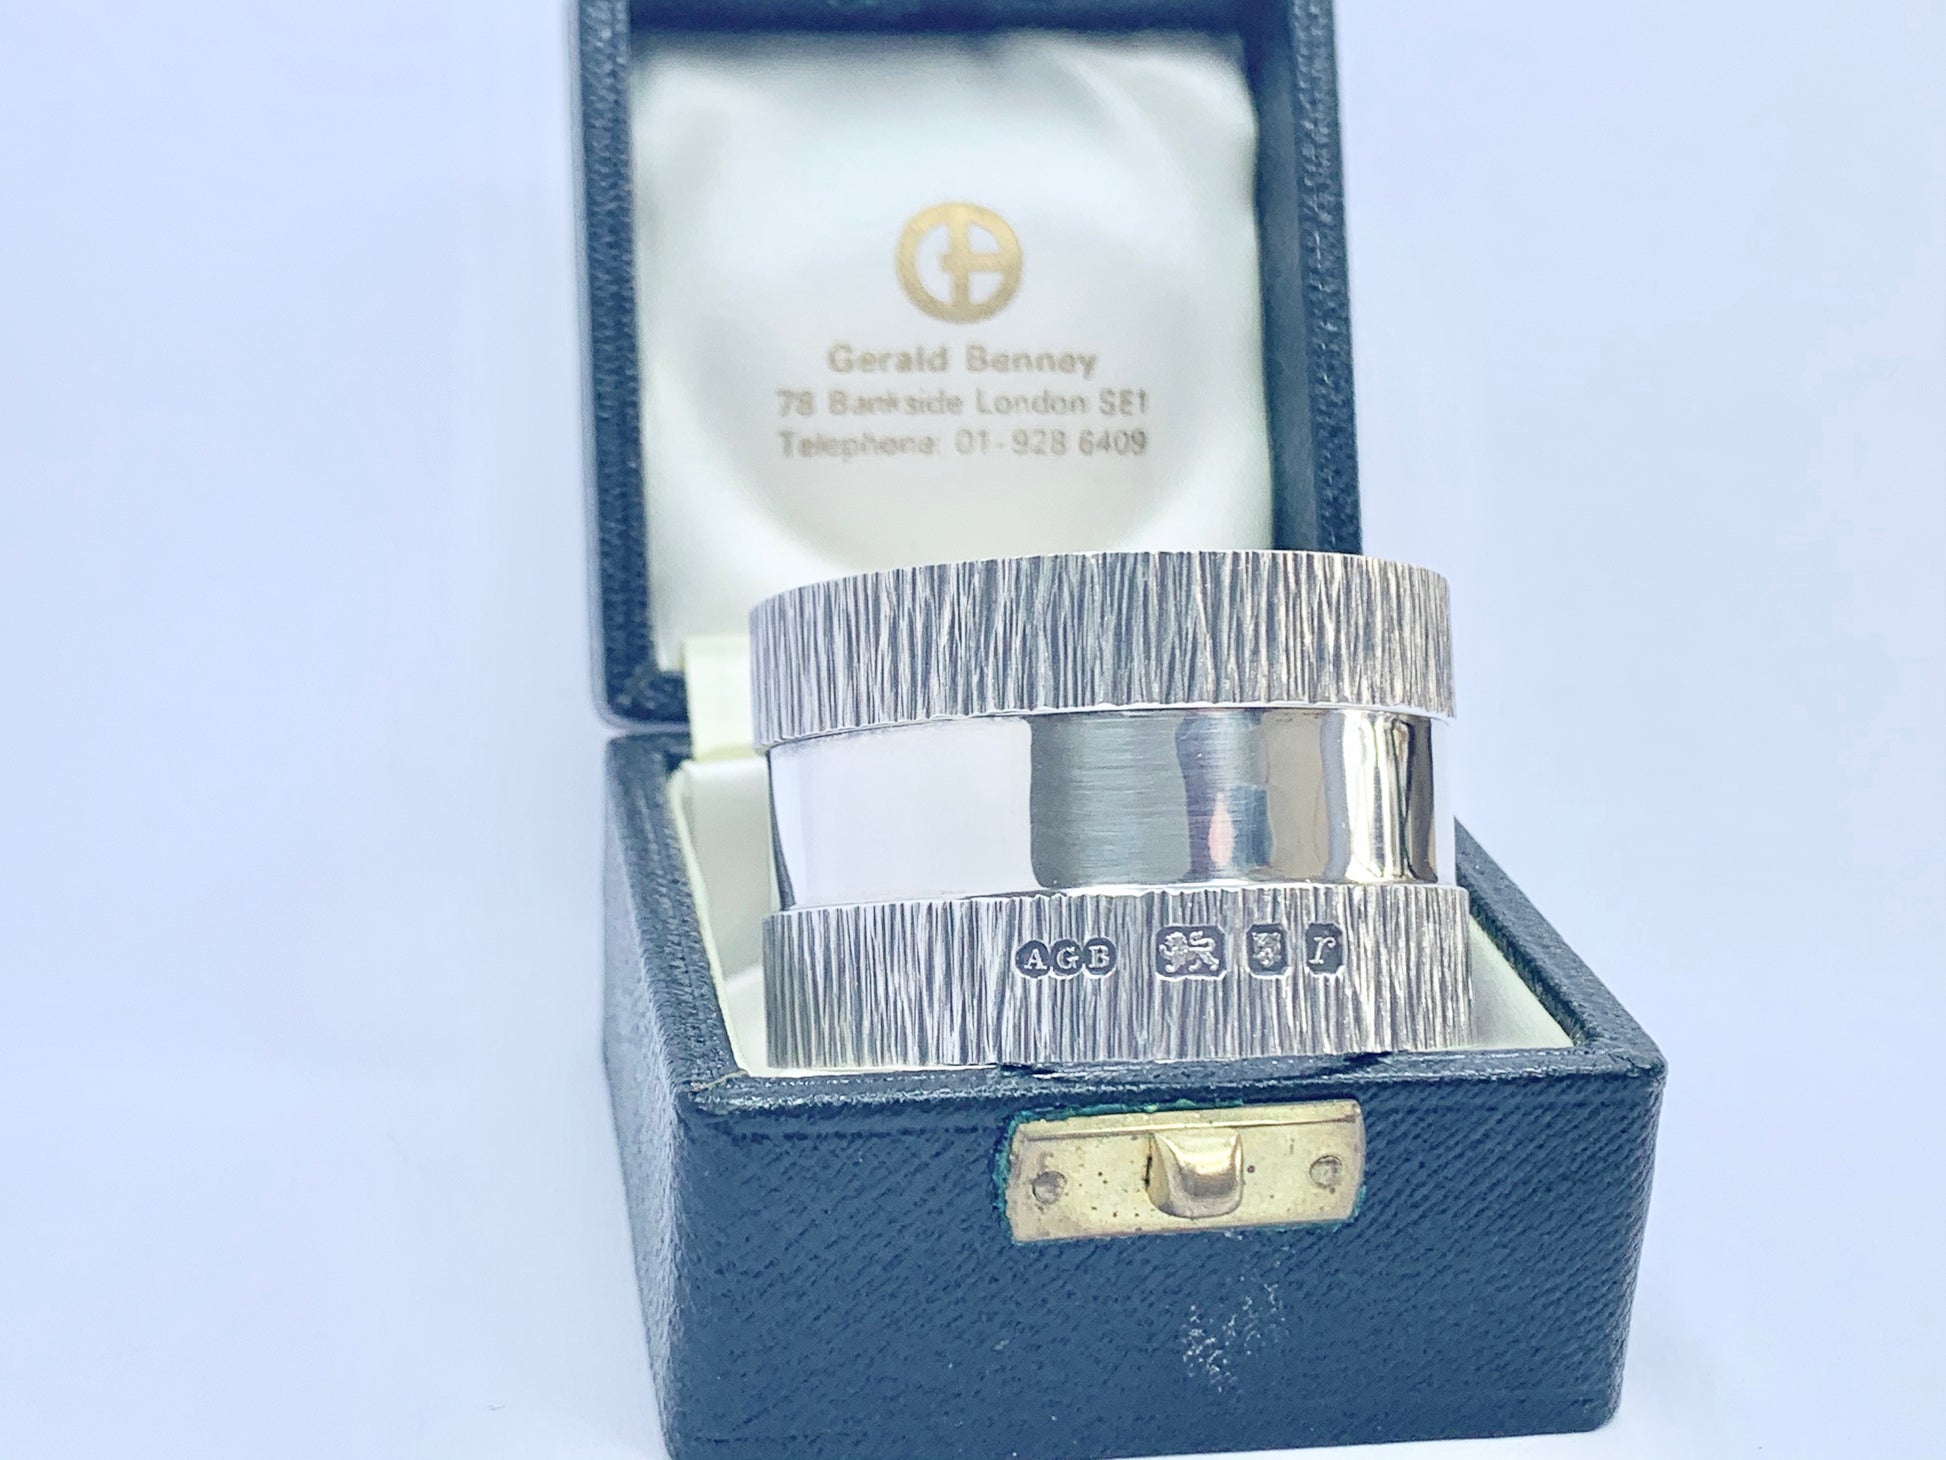 gerald-benney-solid-silver-napkin-ring